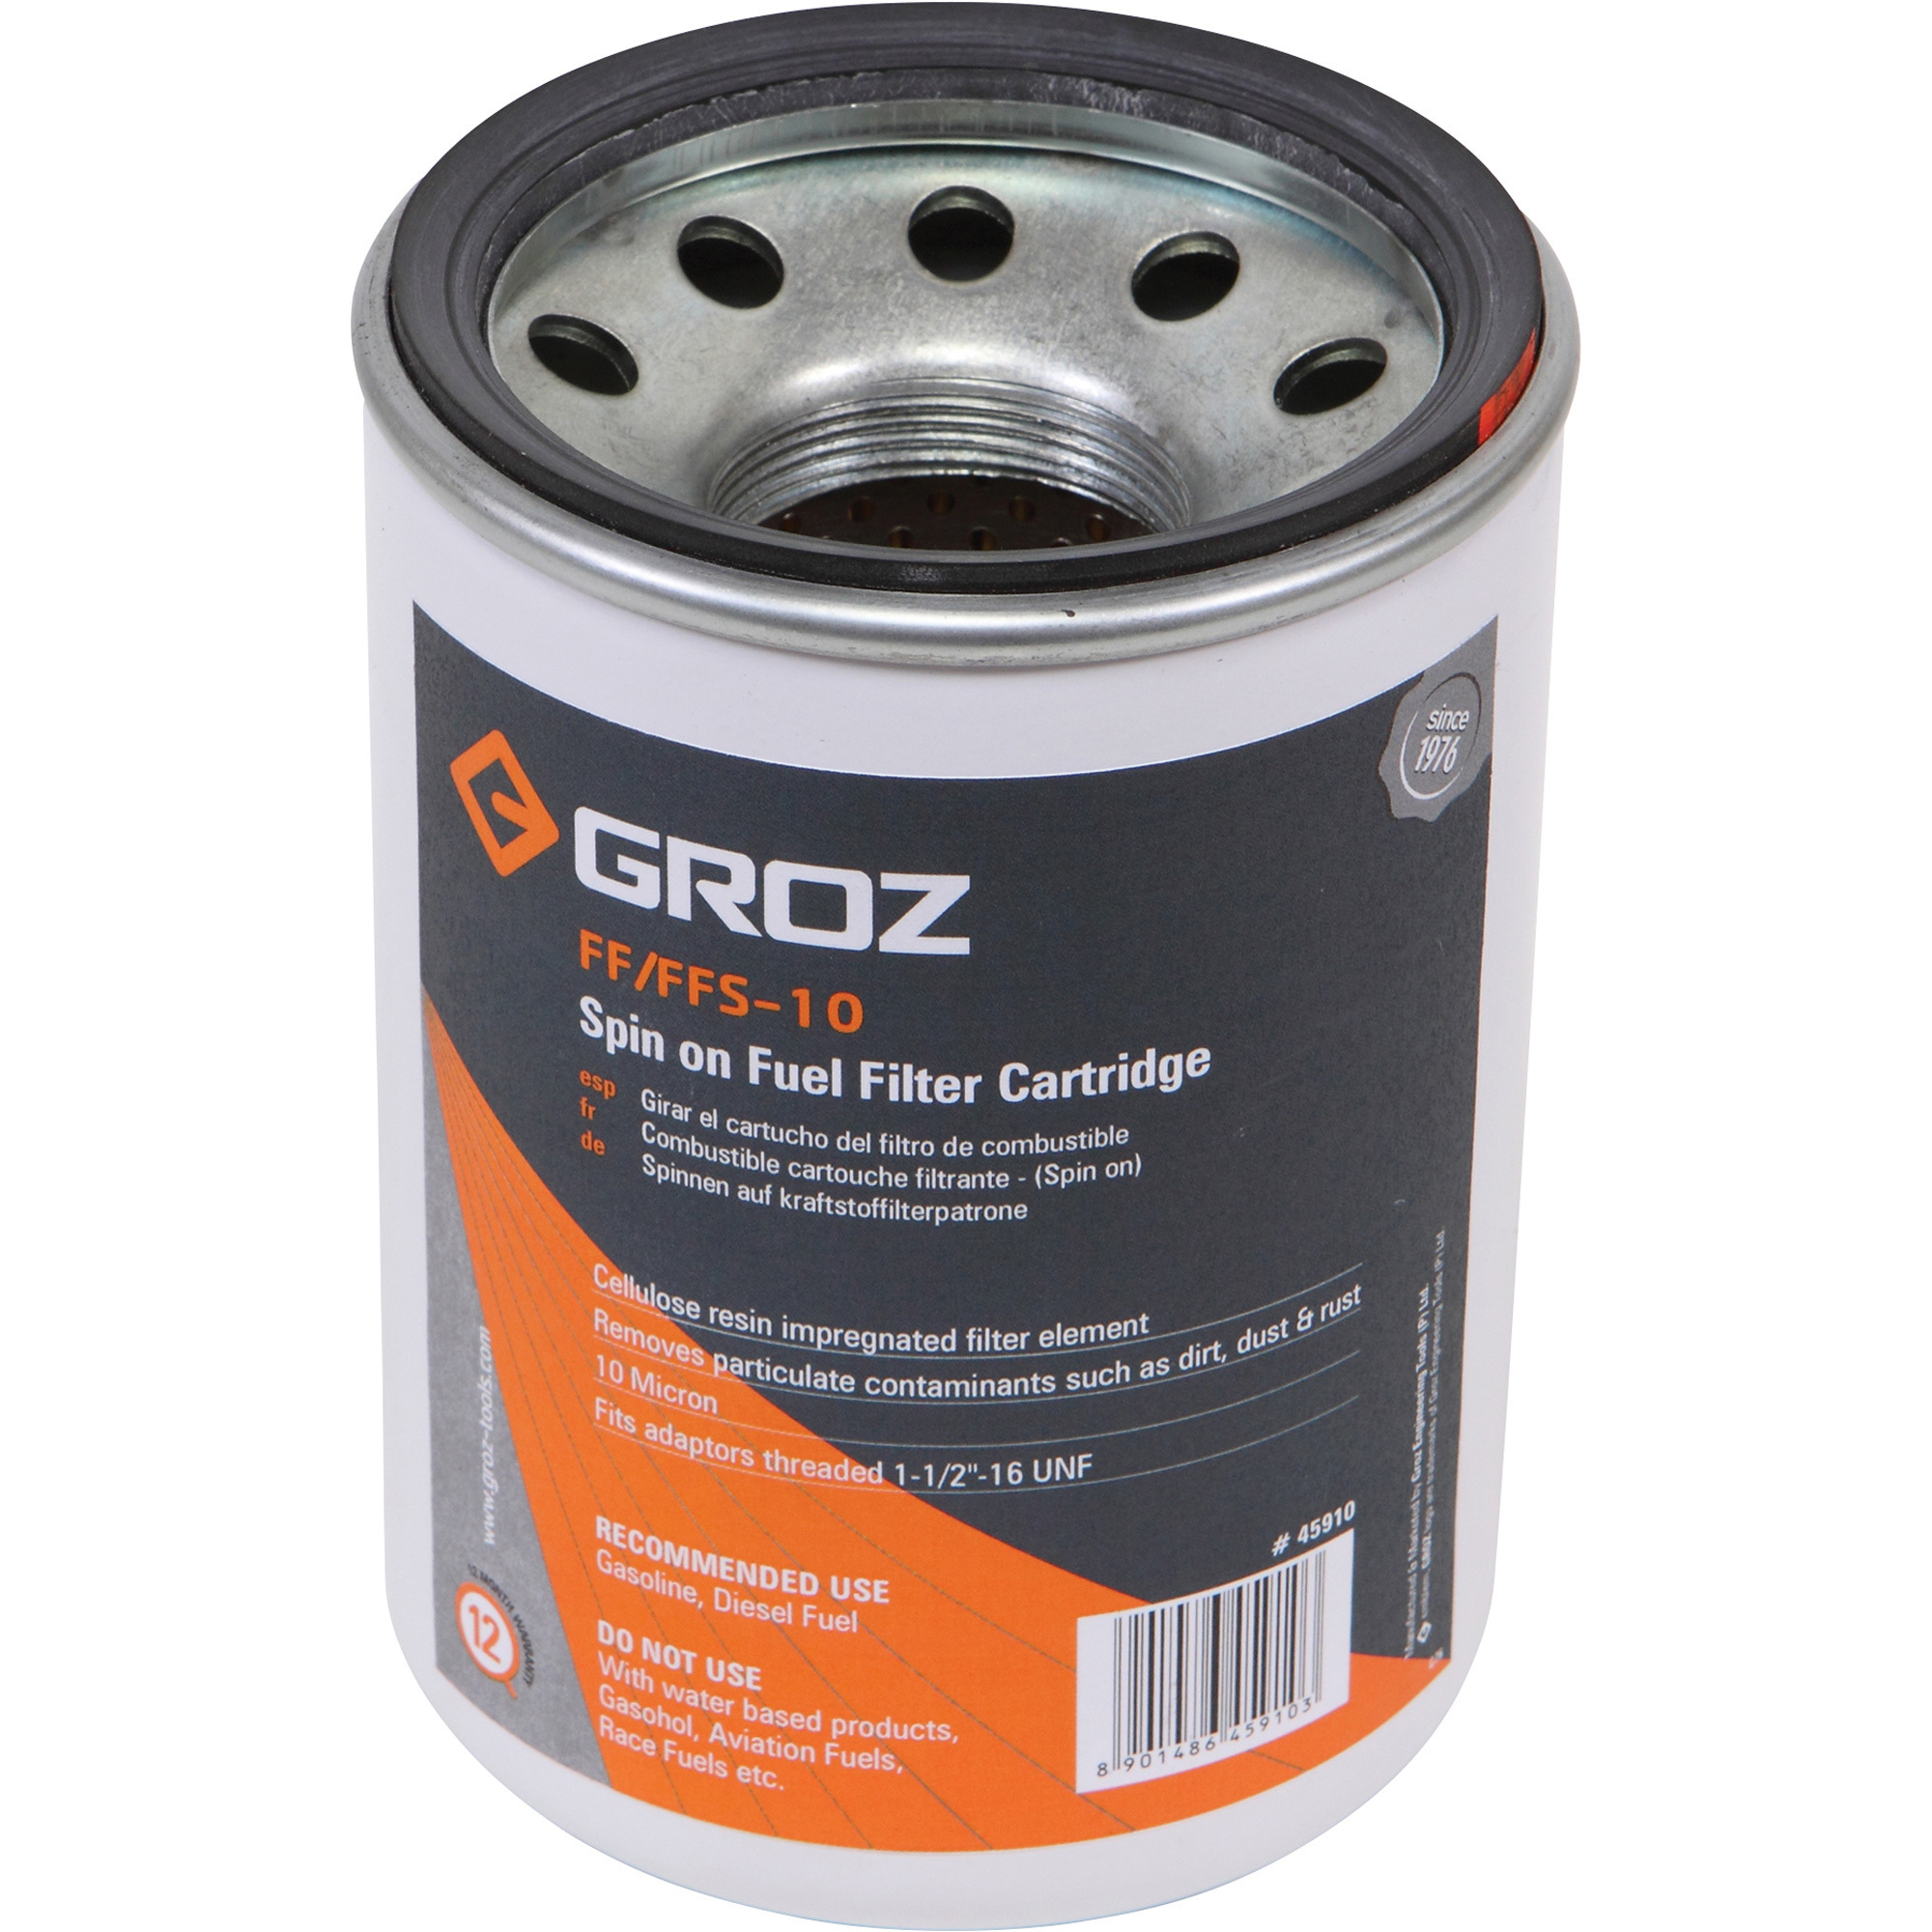 GROZ Spin On Fuel Filter Replacement Cartridge, 10 Micron, 20 GPM, 1 1/2Inch-16 UNF Thread, Model FF/FFS/10